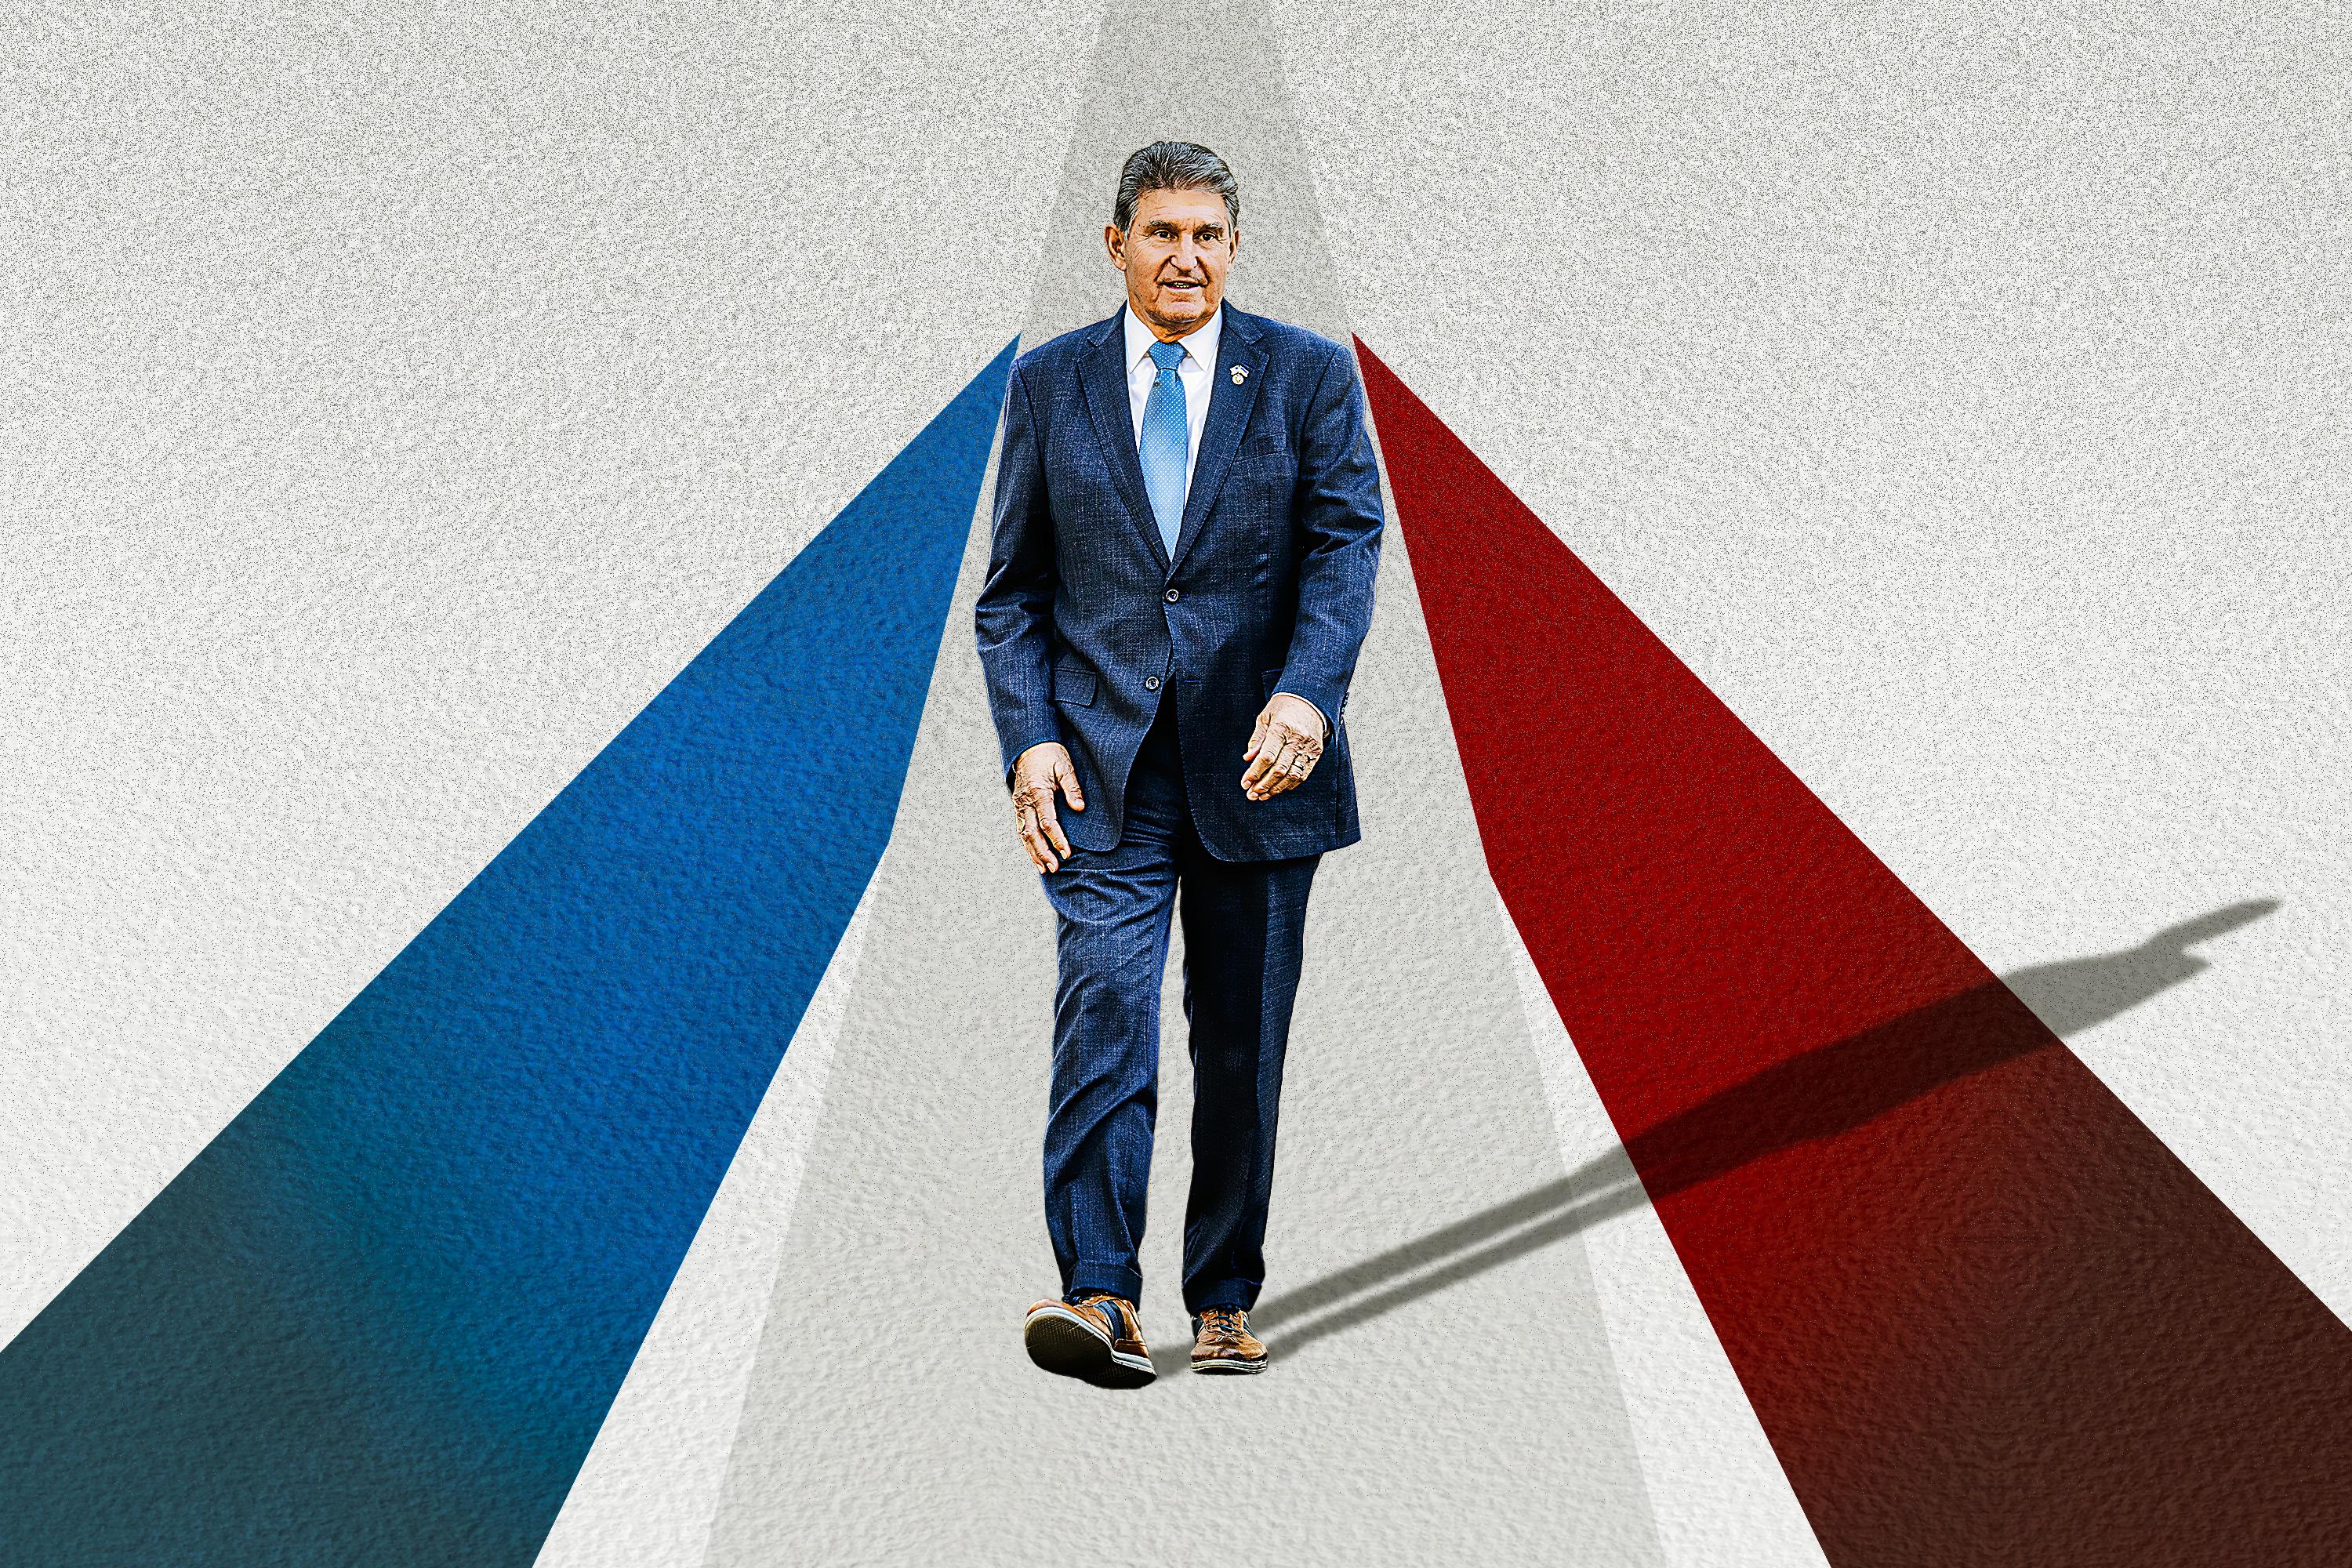 Manchin in the Middle—a Senator at a Crossroads